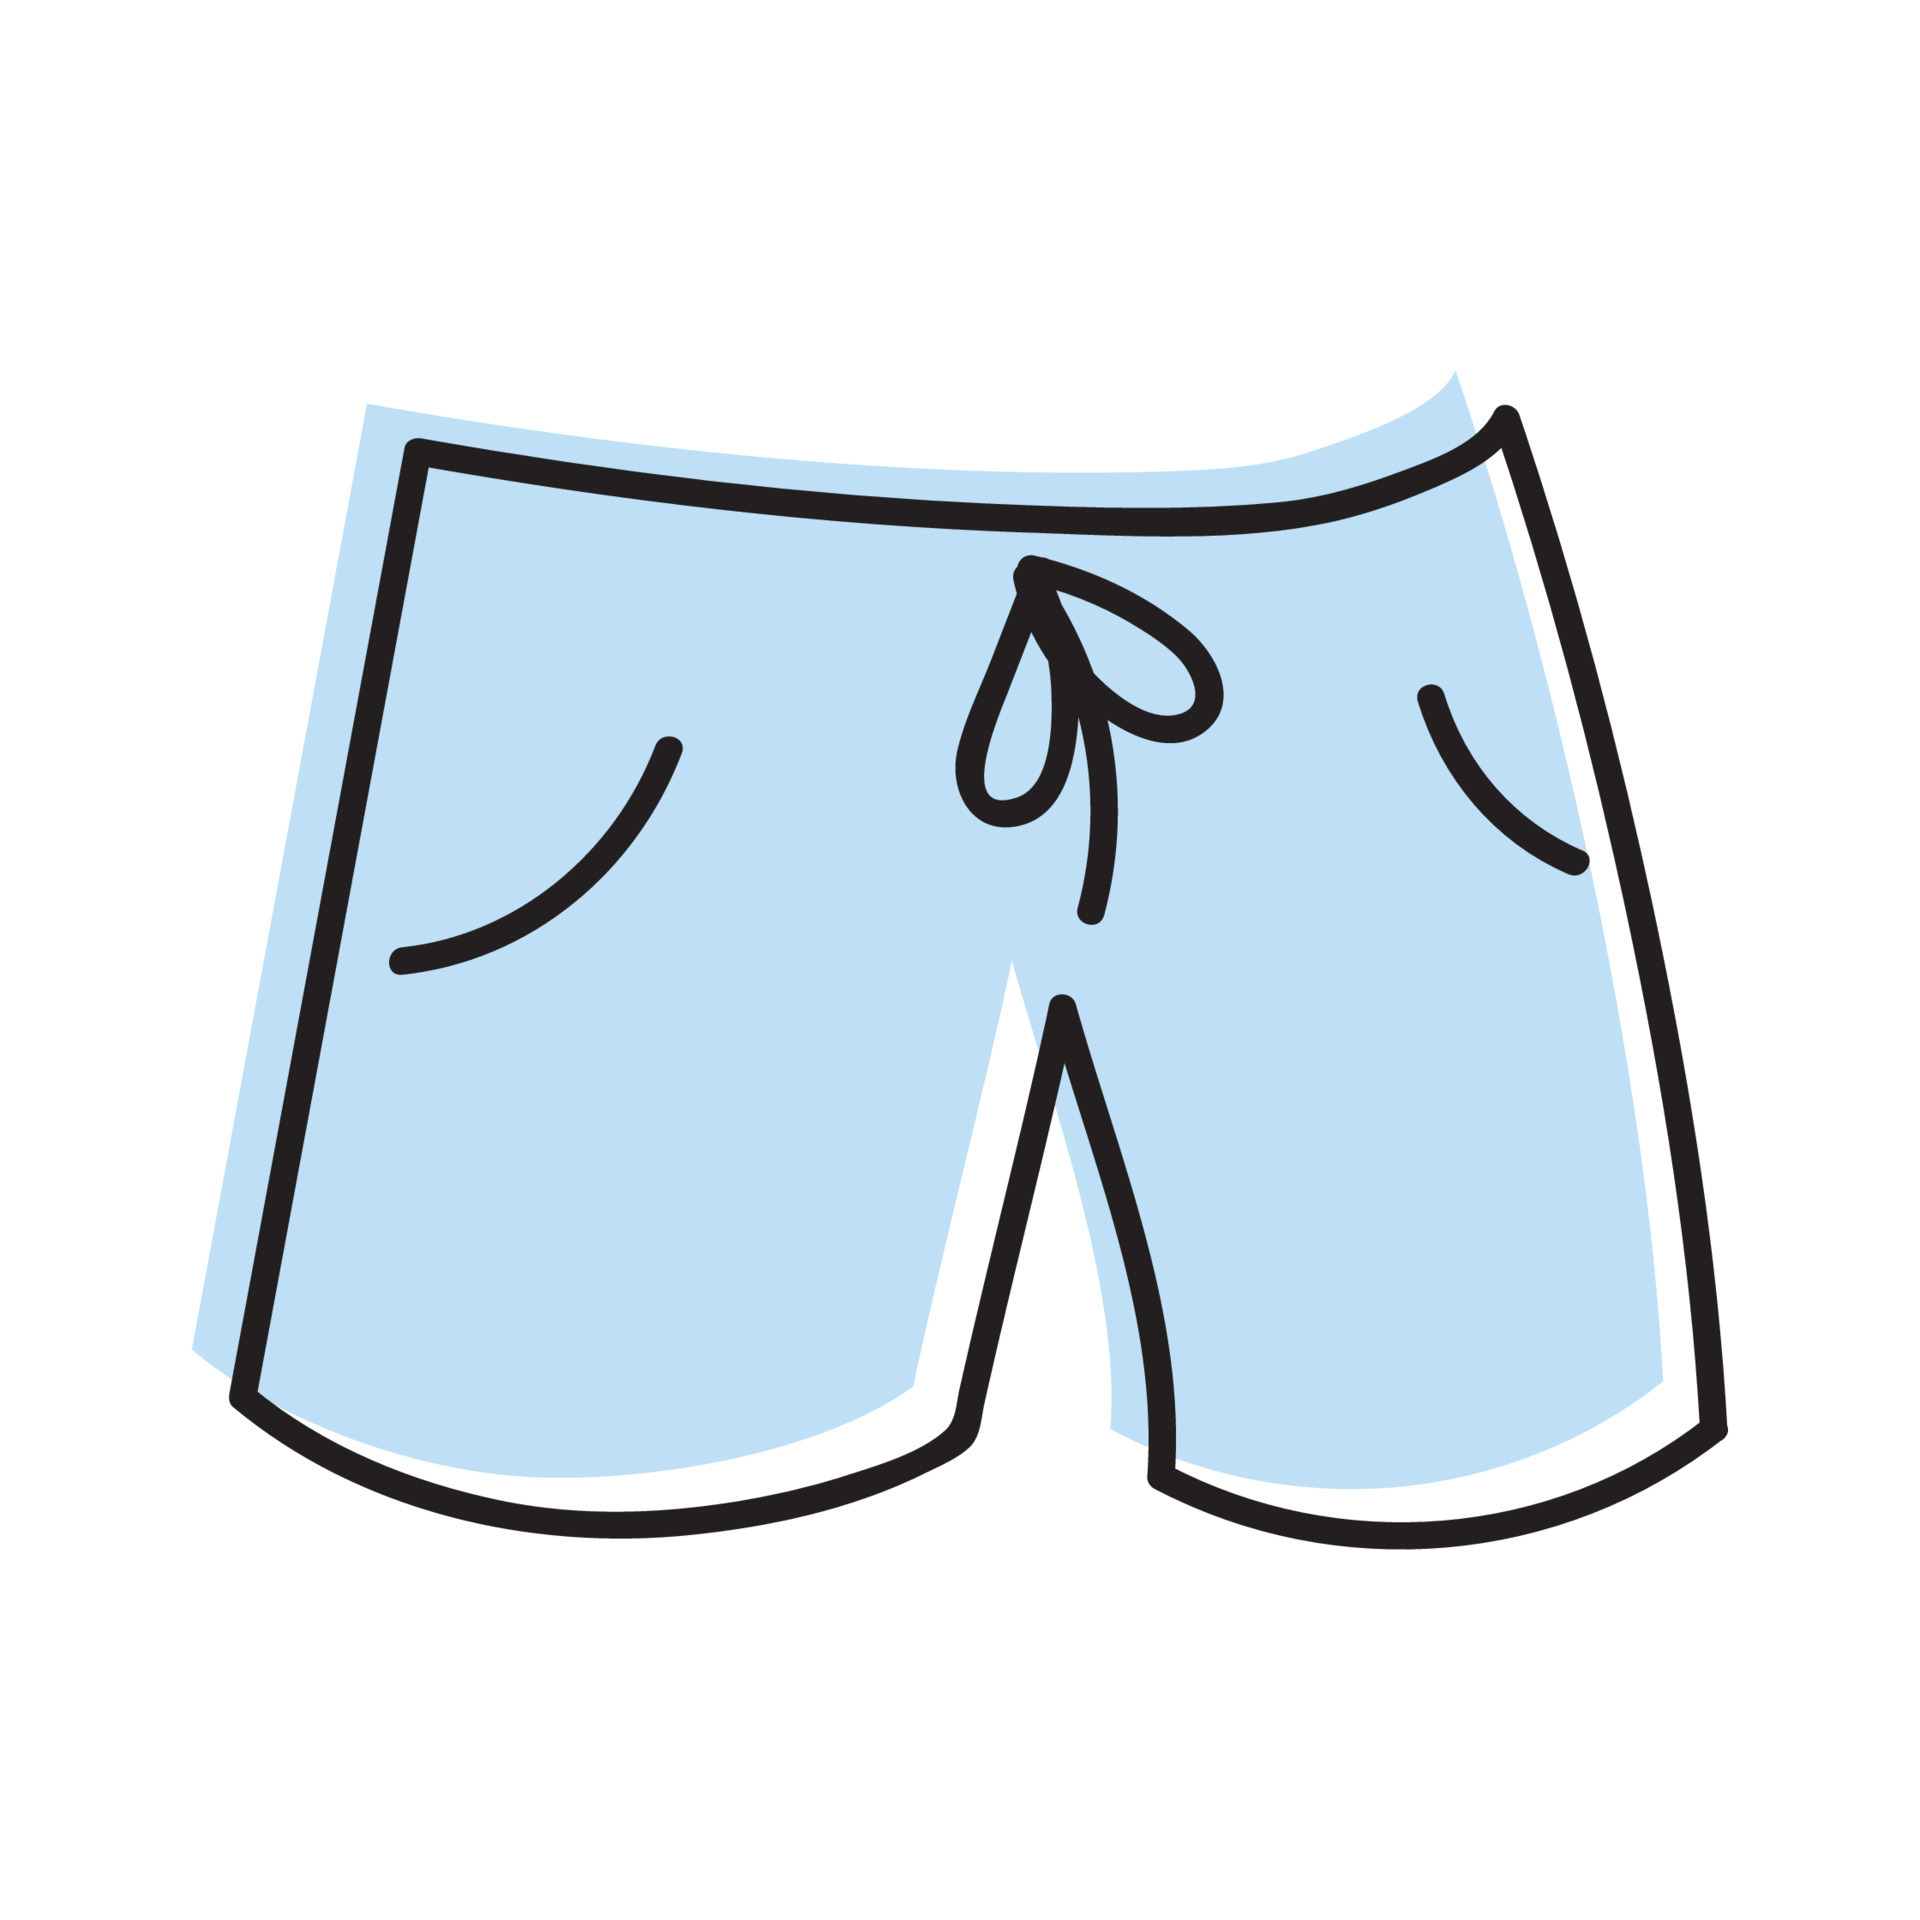 Doodle athletic shorts in vector. Hand drawn man swimming trunks in ...